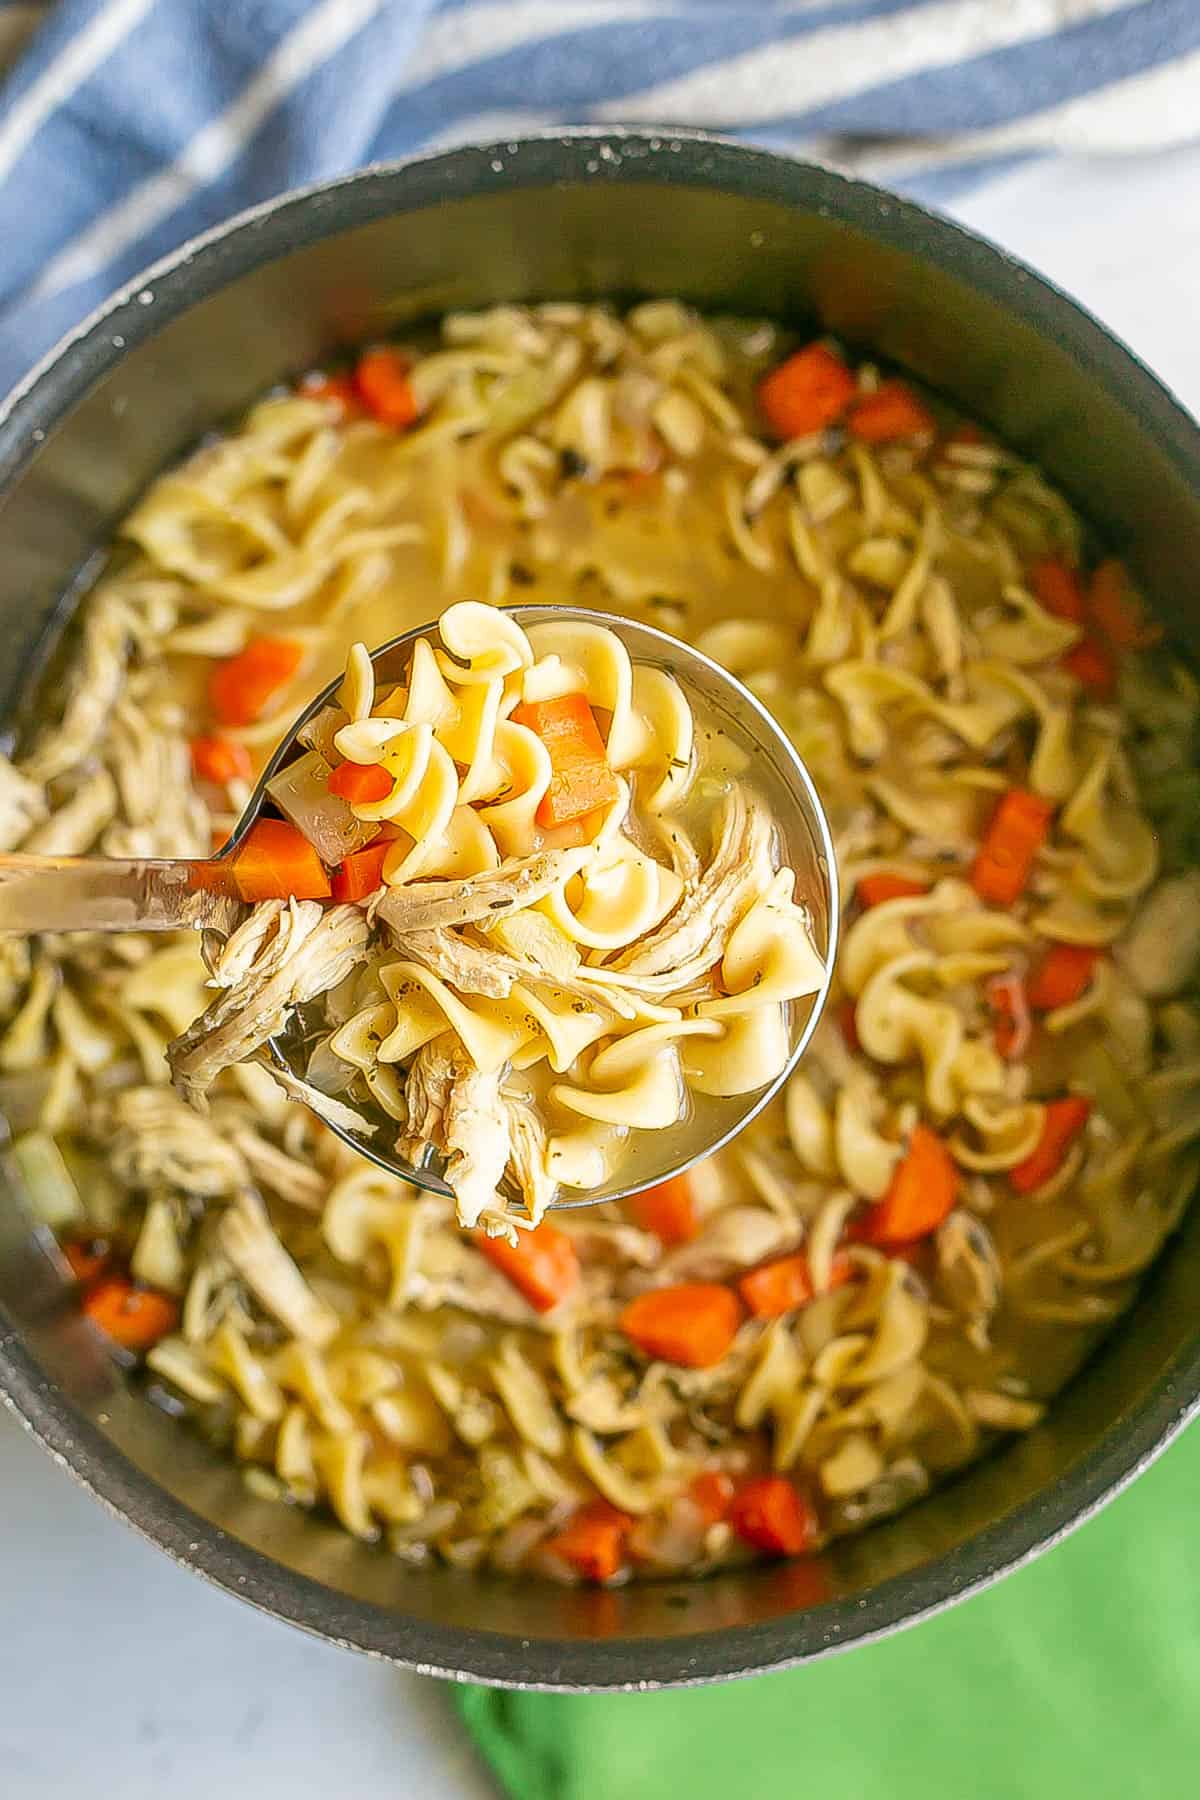 A ladle of chicken noodle soup scooped out from a large dark pot.